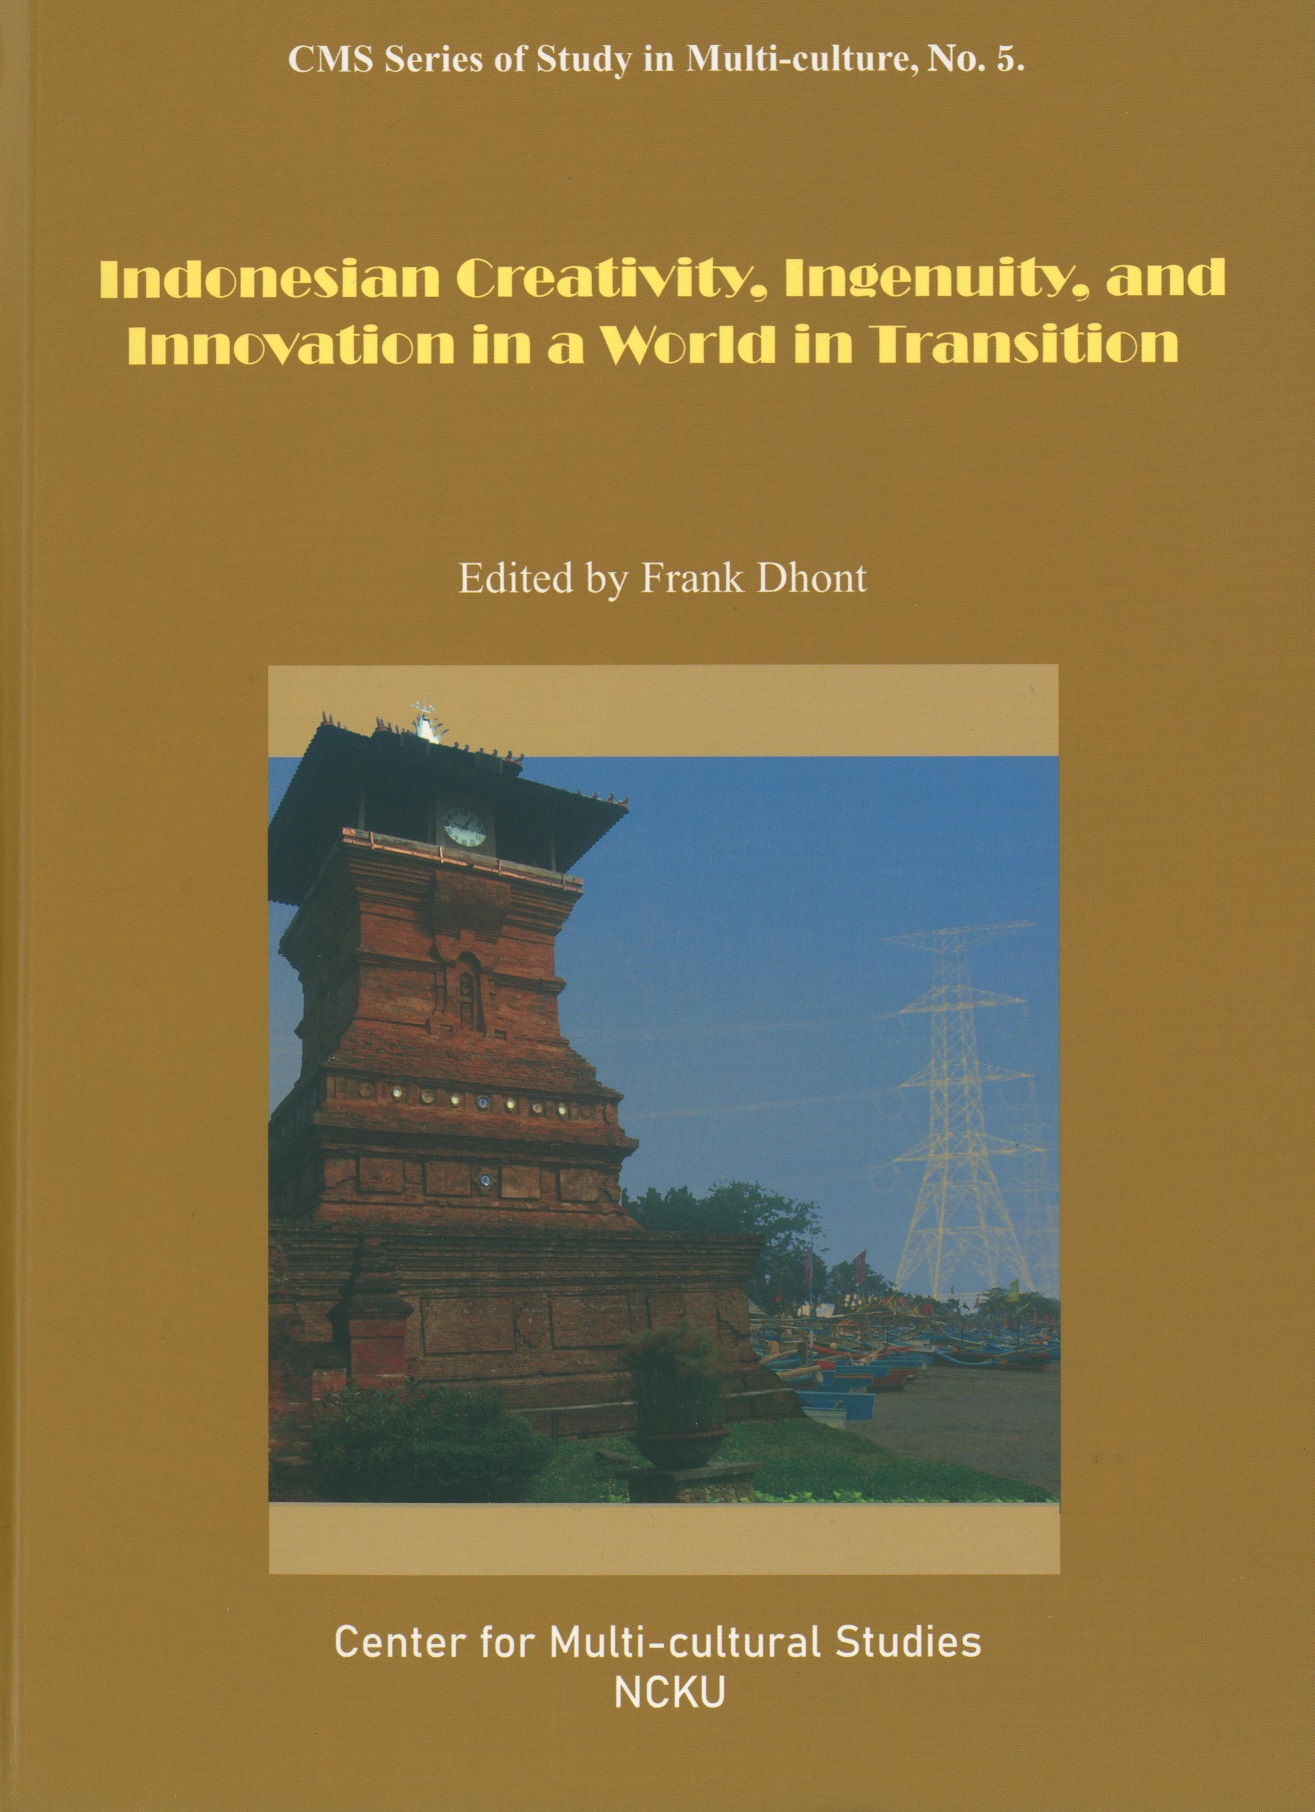 《Indonesian Creativity, Ingenuity, and Innovation in a World in Transition》專書(5)-圖1